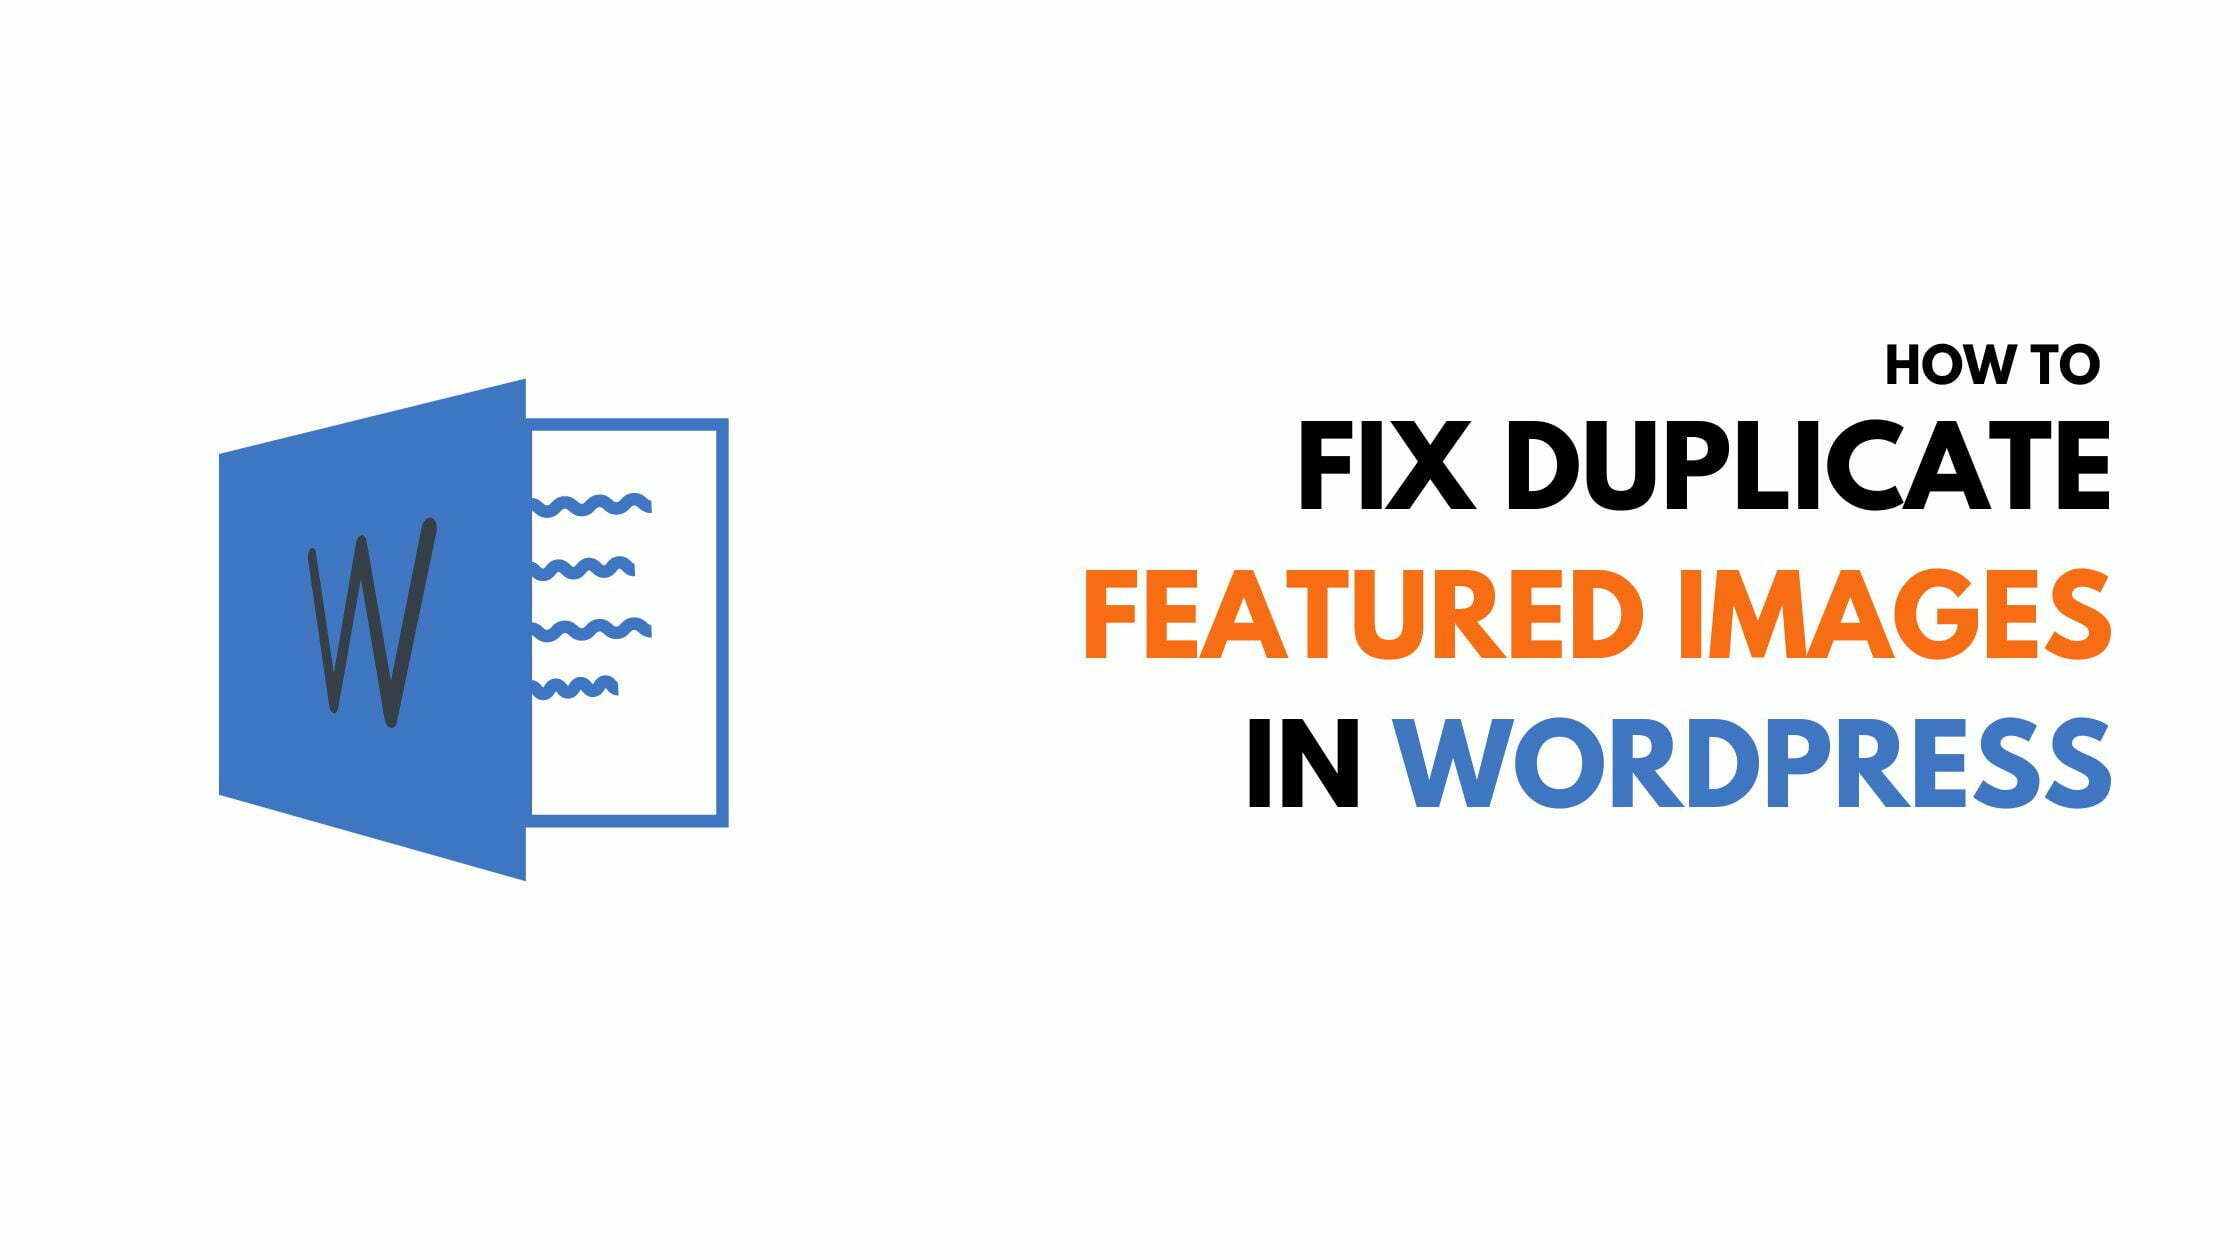 How to Fix Duplicate Featured Images in WordPress